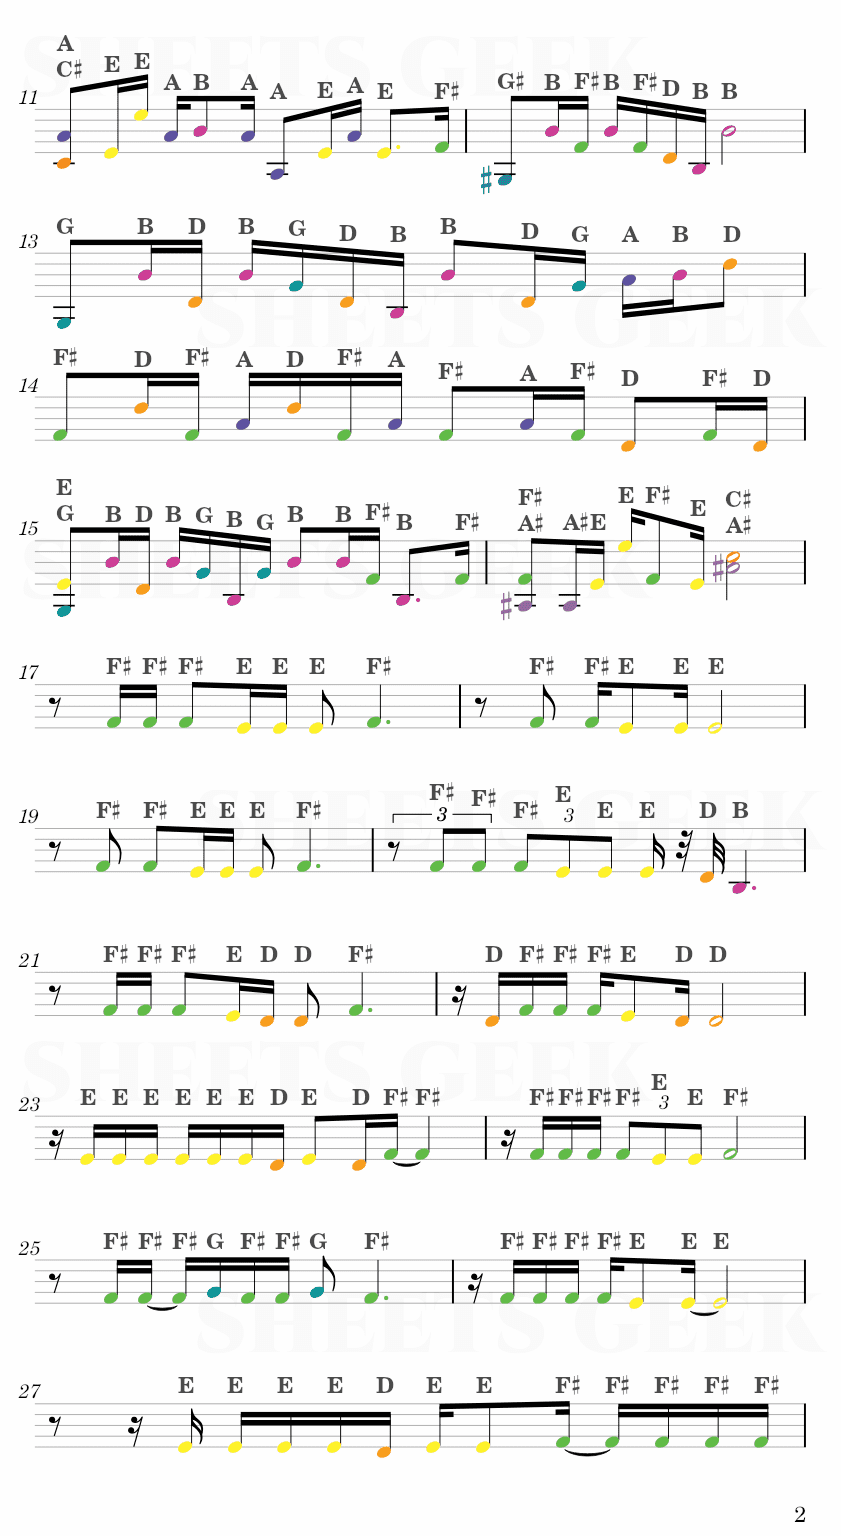 Hotel California - The Eagles Easy Sheet Music Free for piano, keyboard, flute, violin, sax, cello page 2